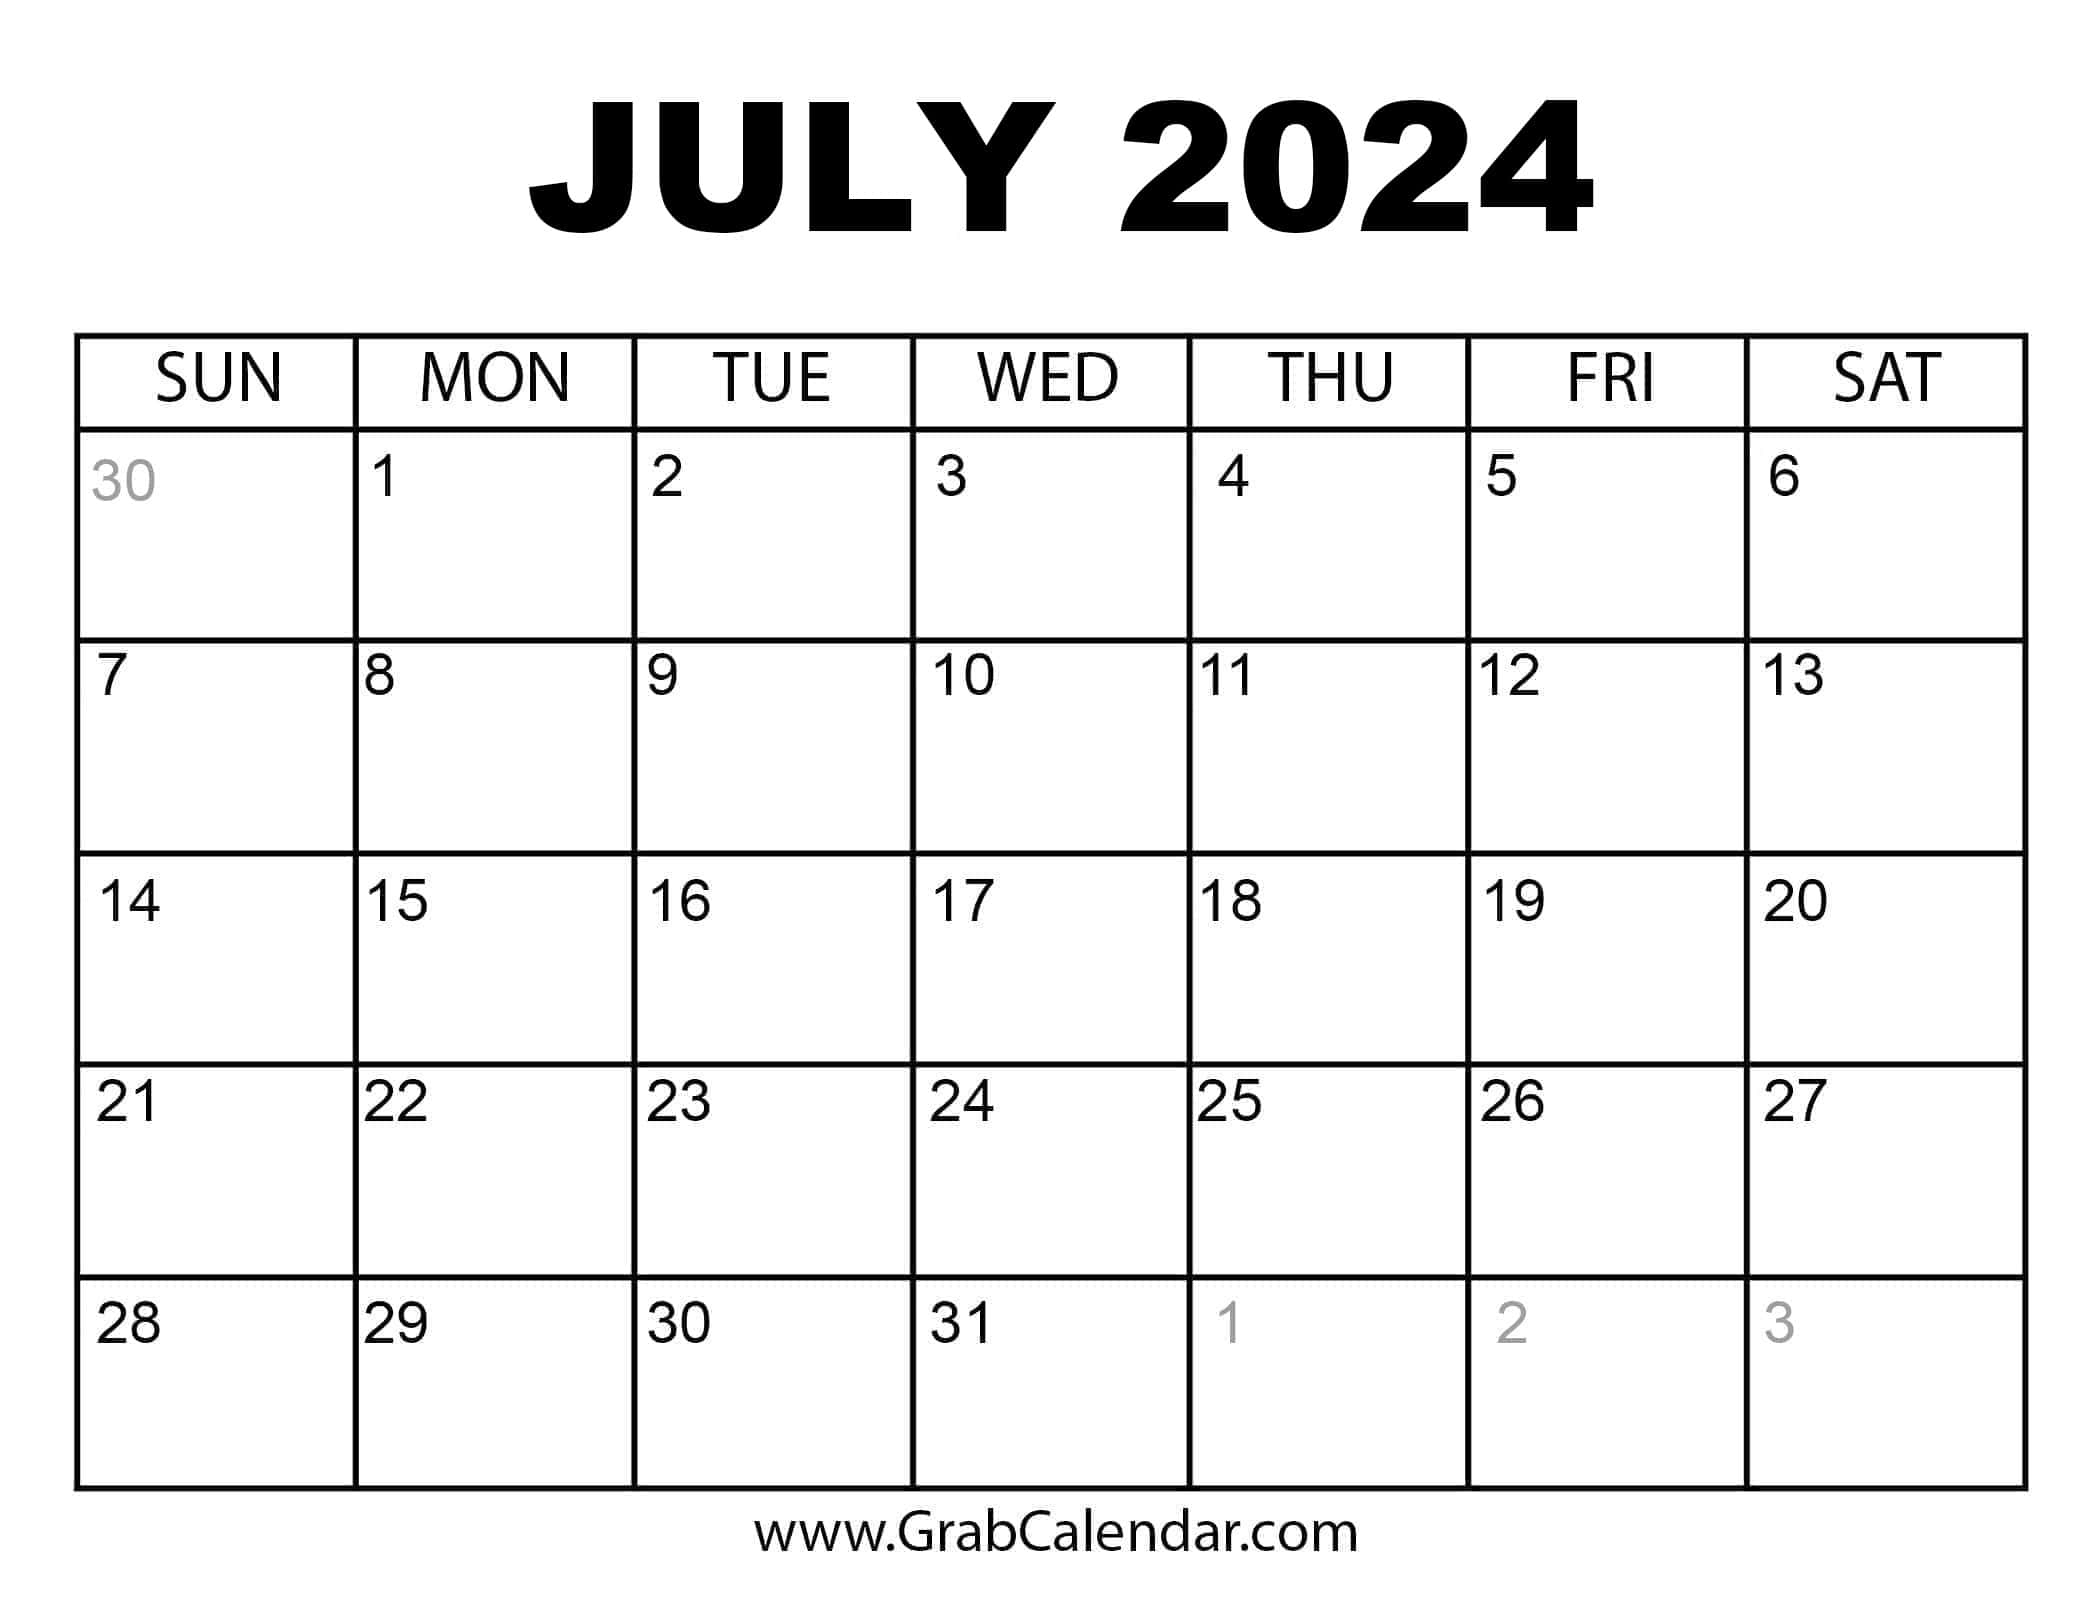 Printable July 2024 Calendar | Show Me A Calendar Of The Month Of July 2024